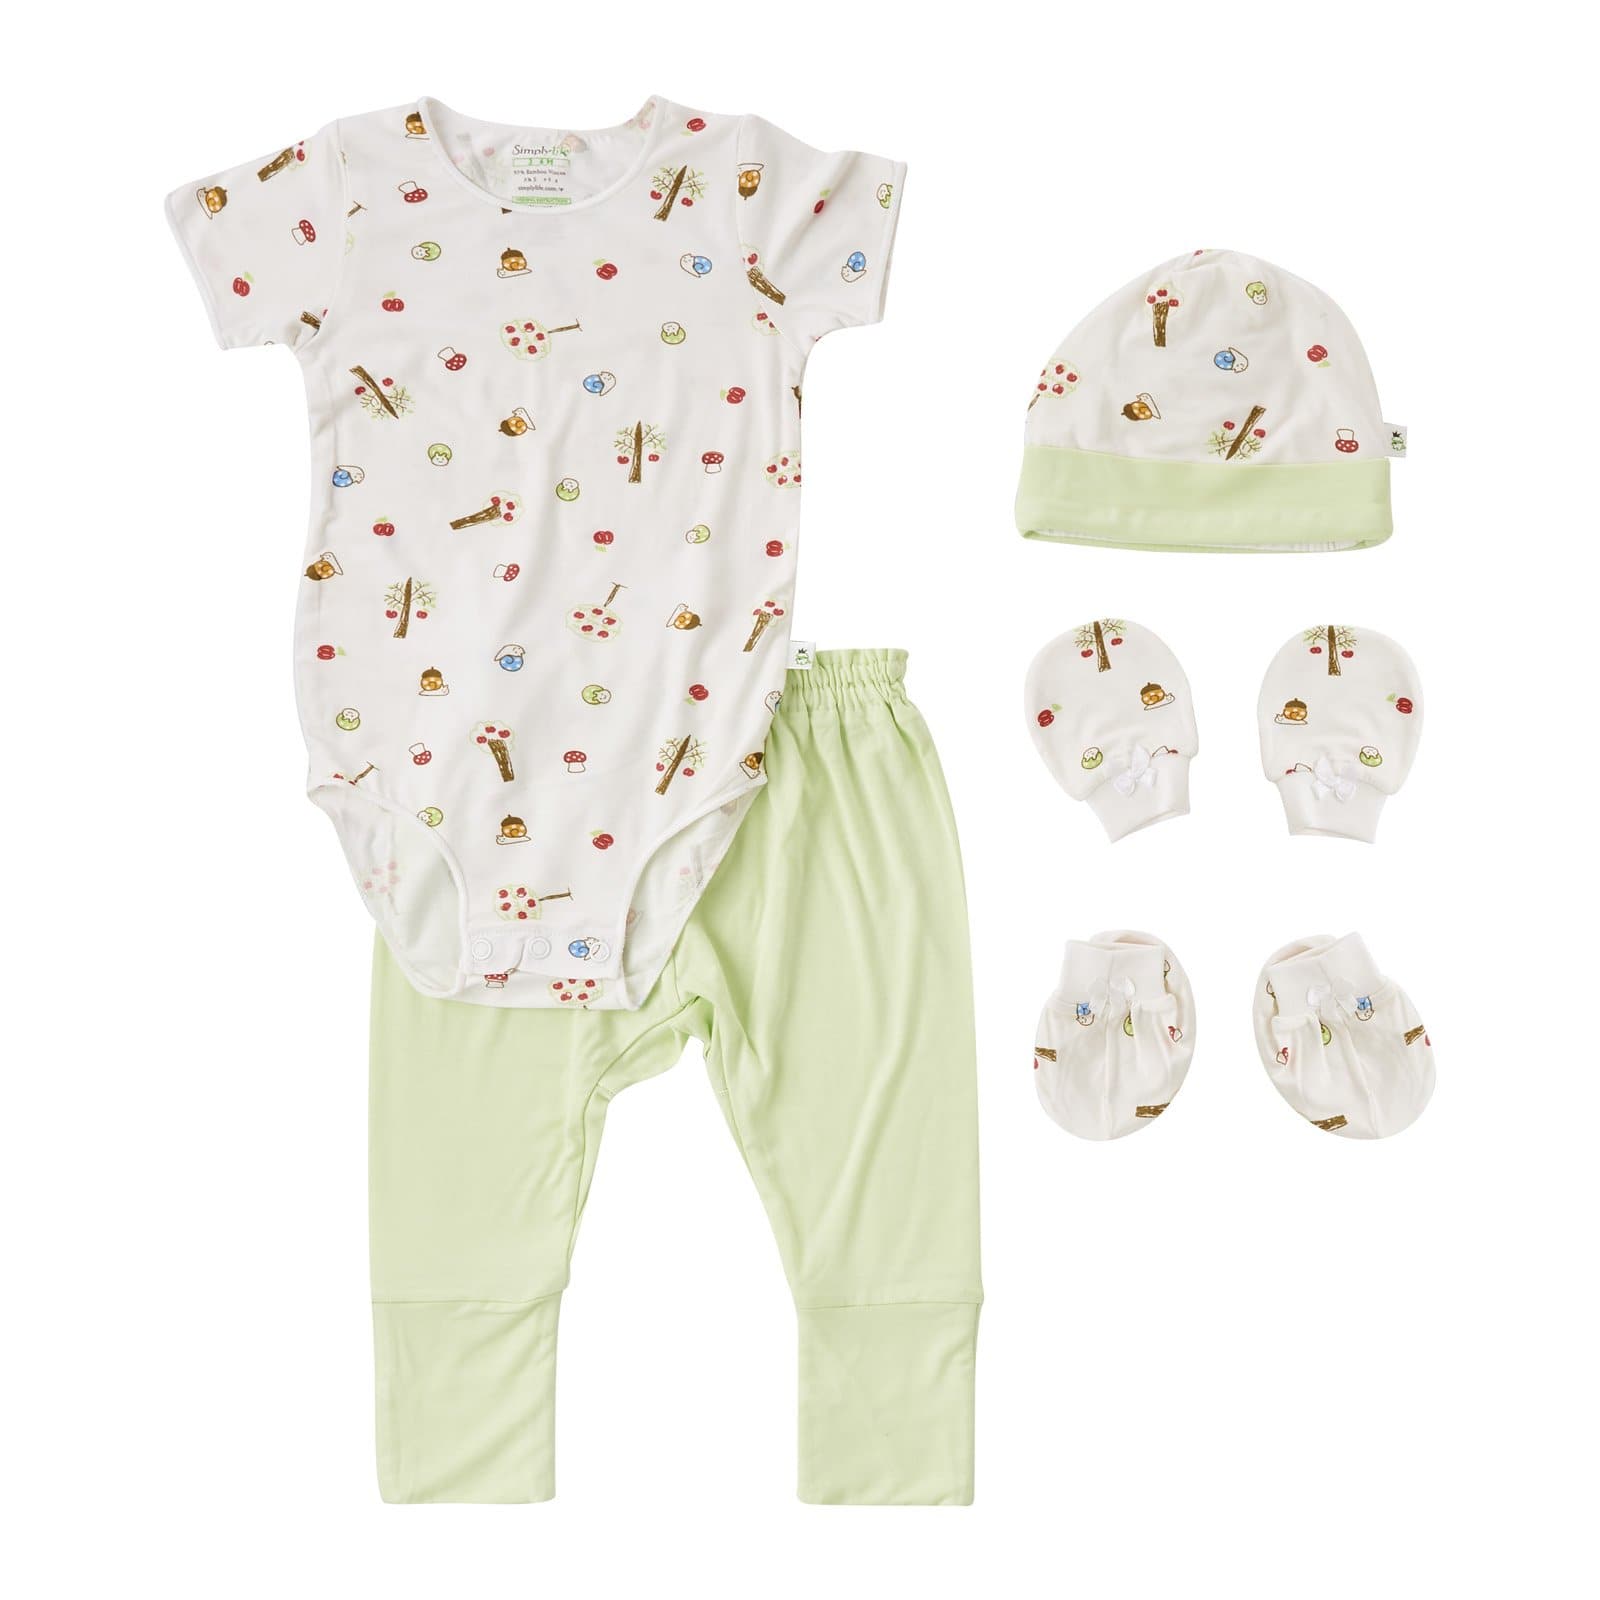 baby-fair Simply Life Apple Tress Collection - 1pc Stretchy Romper, 1pc Long Pants with Footie, Mittens & Booties Set, Cap